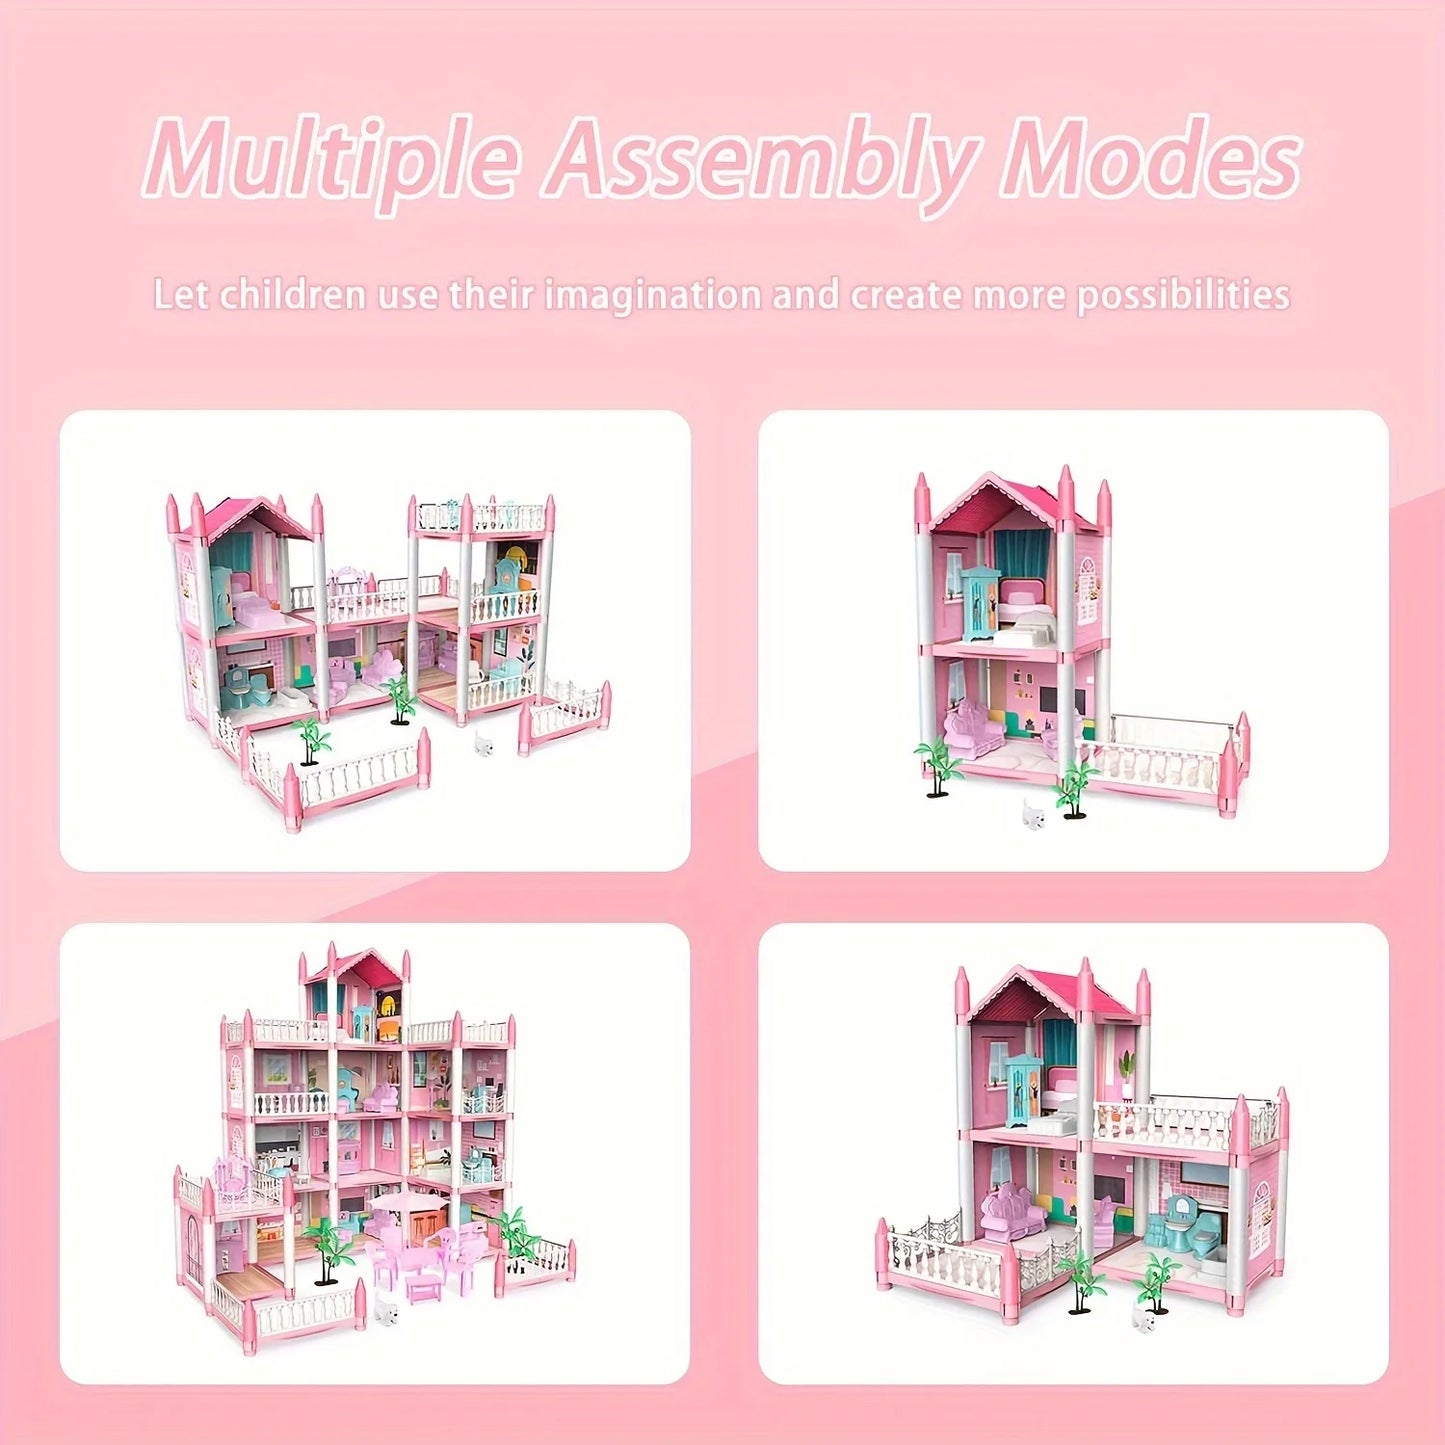 Dream Princess Castle 3D DIY Assembly Dollhouse with Music - Perfect for Girls' Imaginative Play!